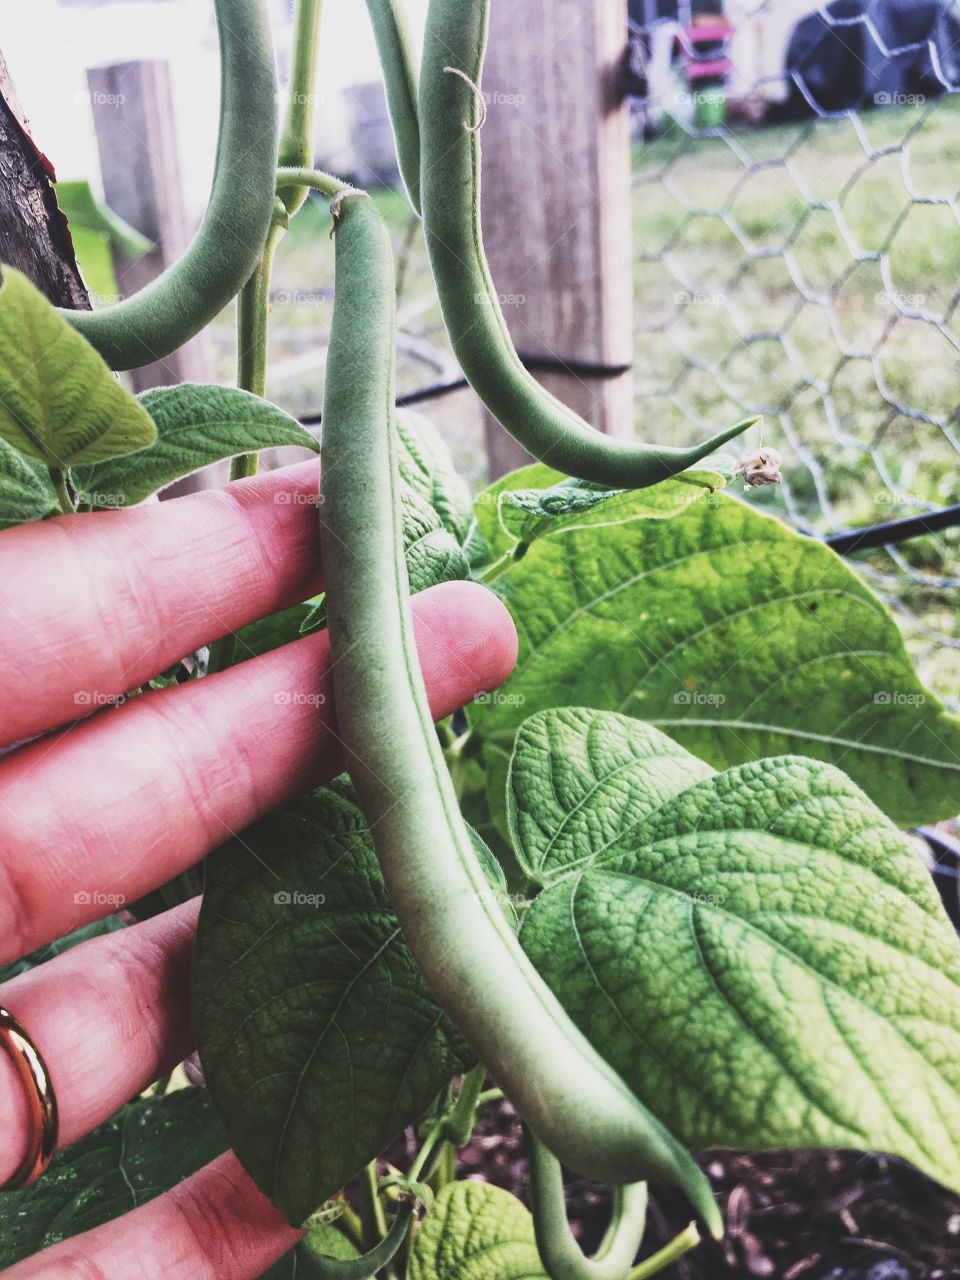 Green beans full and ready for pickin’ 